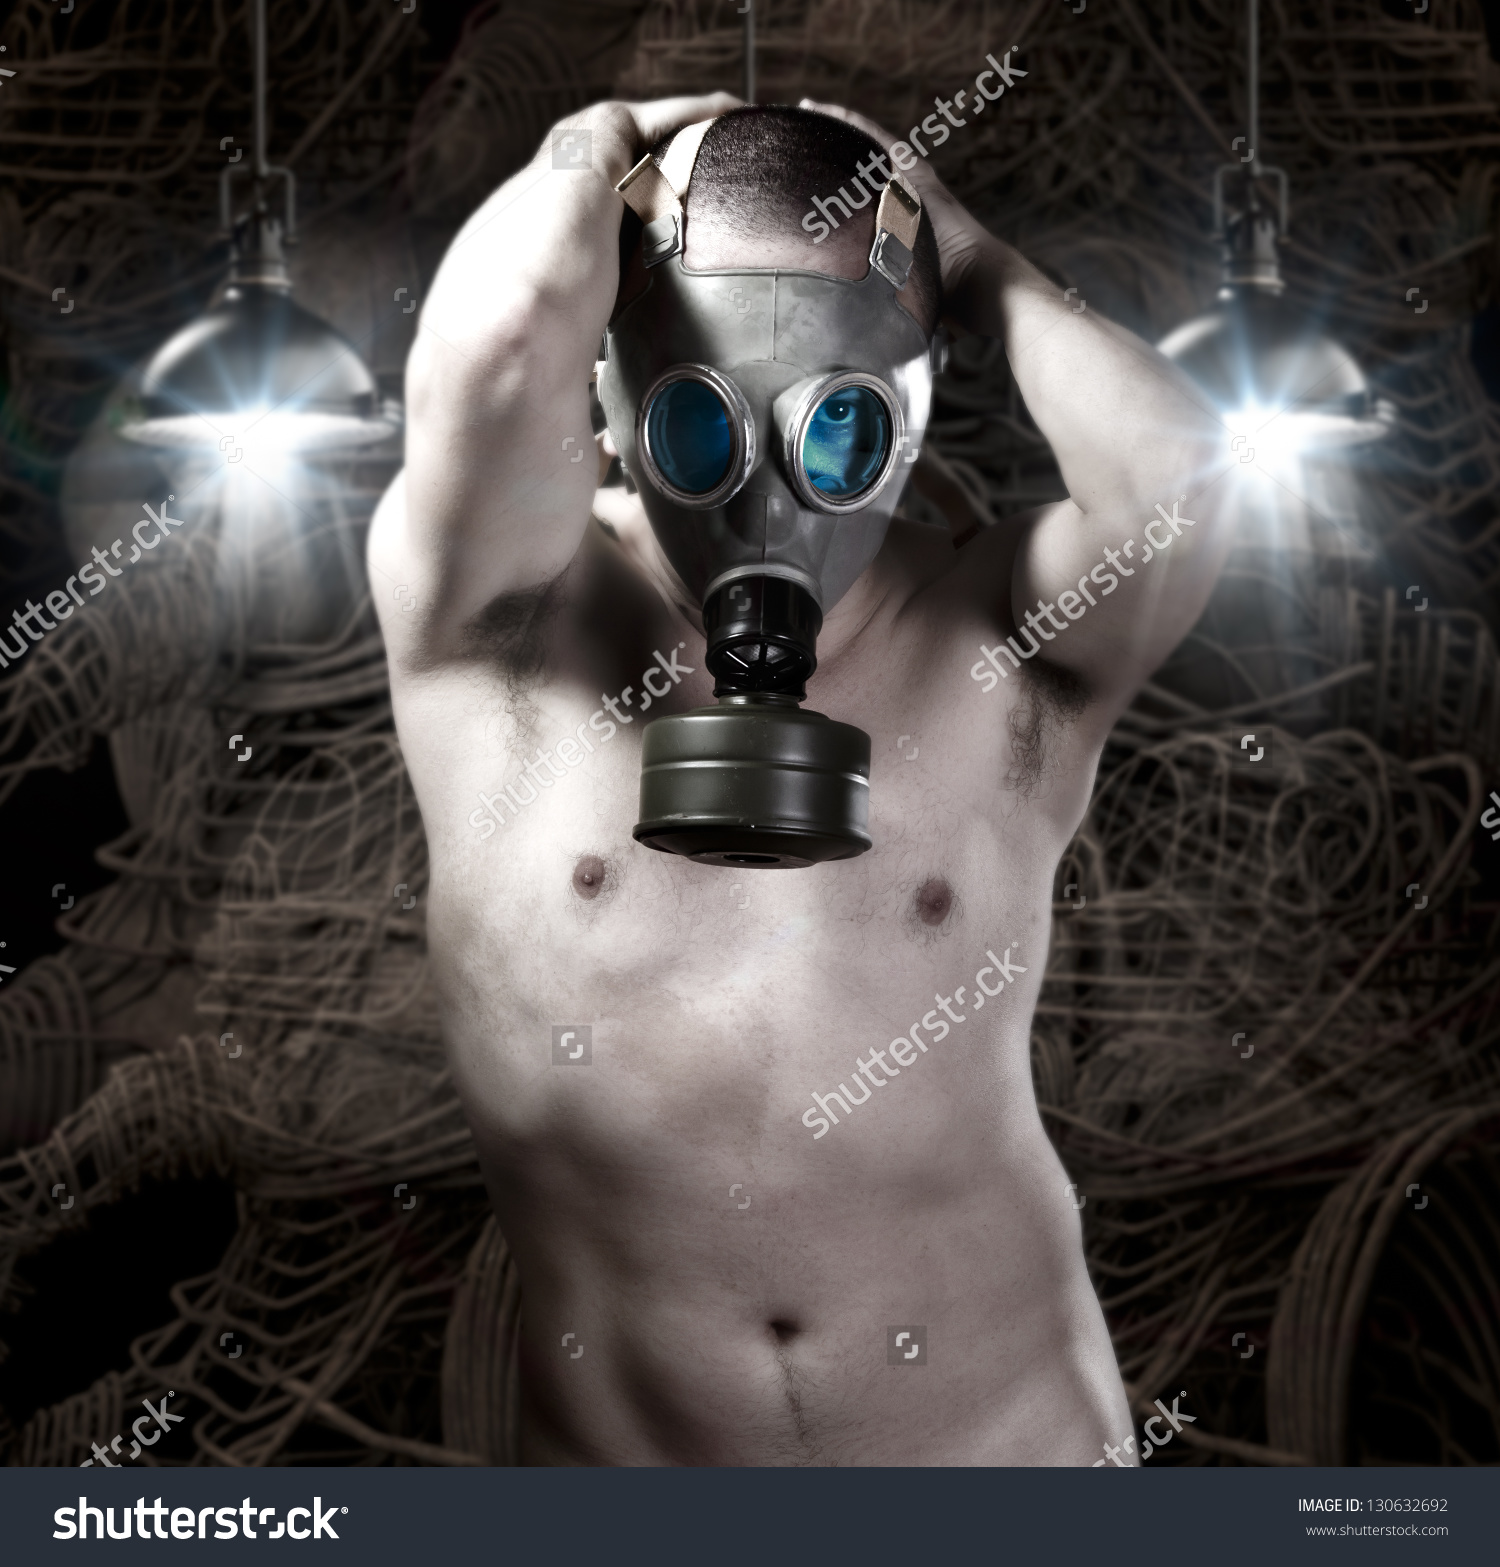 stock-photo-naked-man-with-gas-mask-on-background-of-robots-and-technology-130632692.jpg